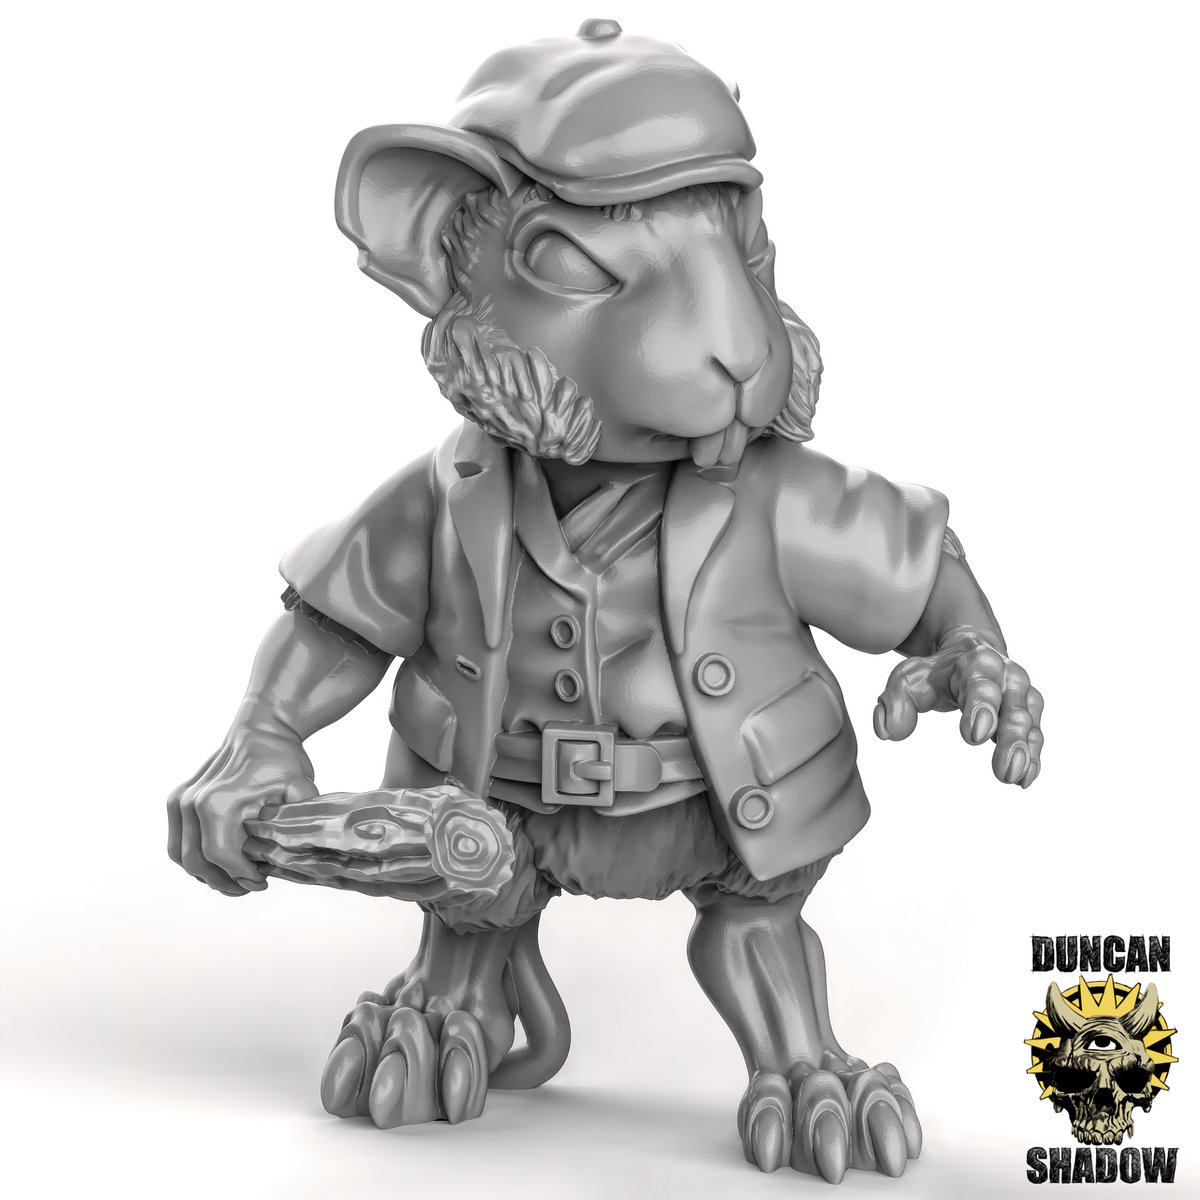 Mousle with club
Sculpted in Zbrush for 3d printing 
one of the many sculpts out this month for Tribes and Patreon supporters 

#zbrush #digitalsculpting